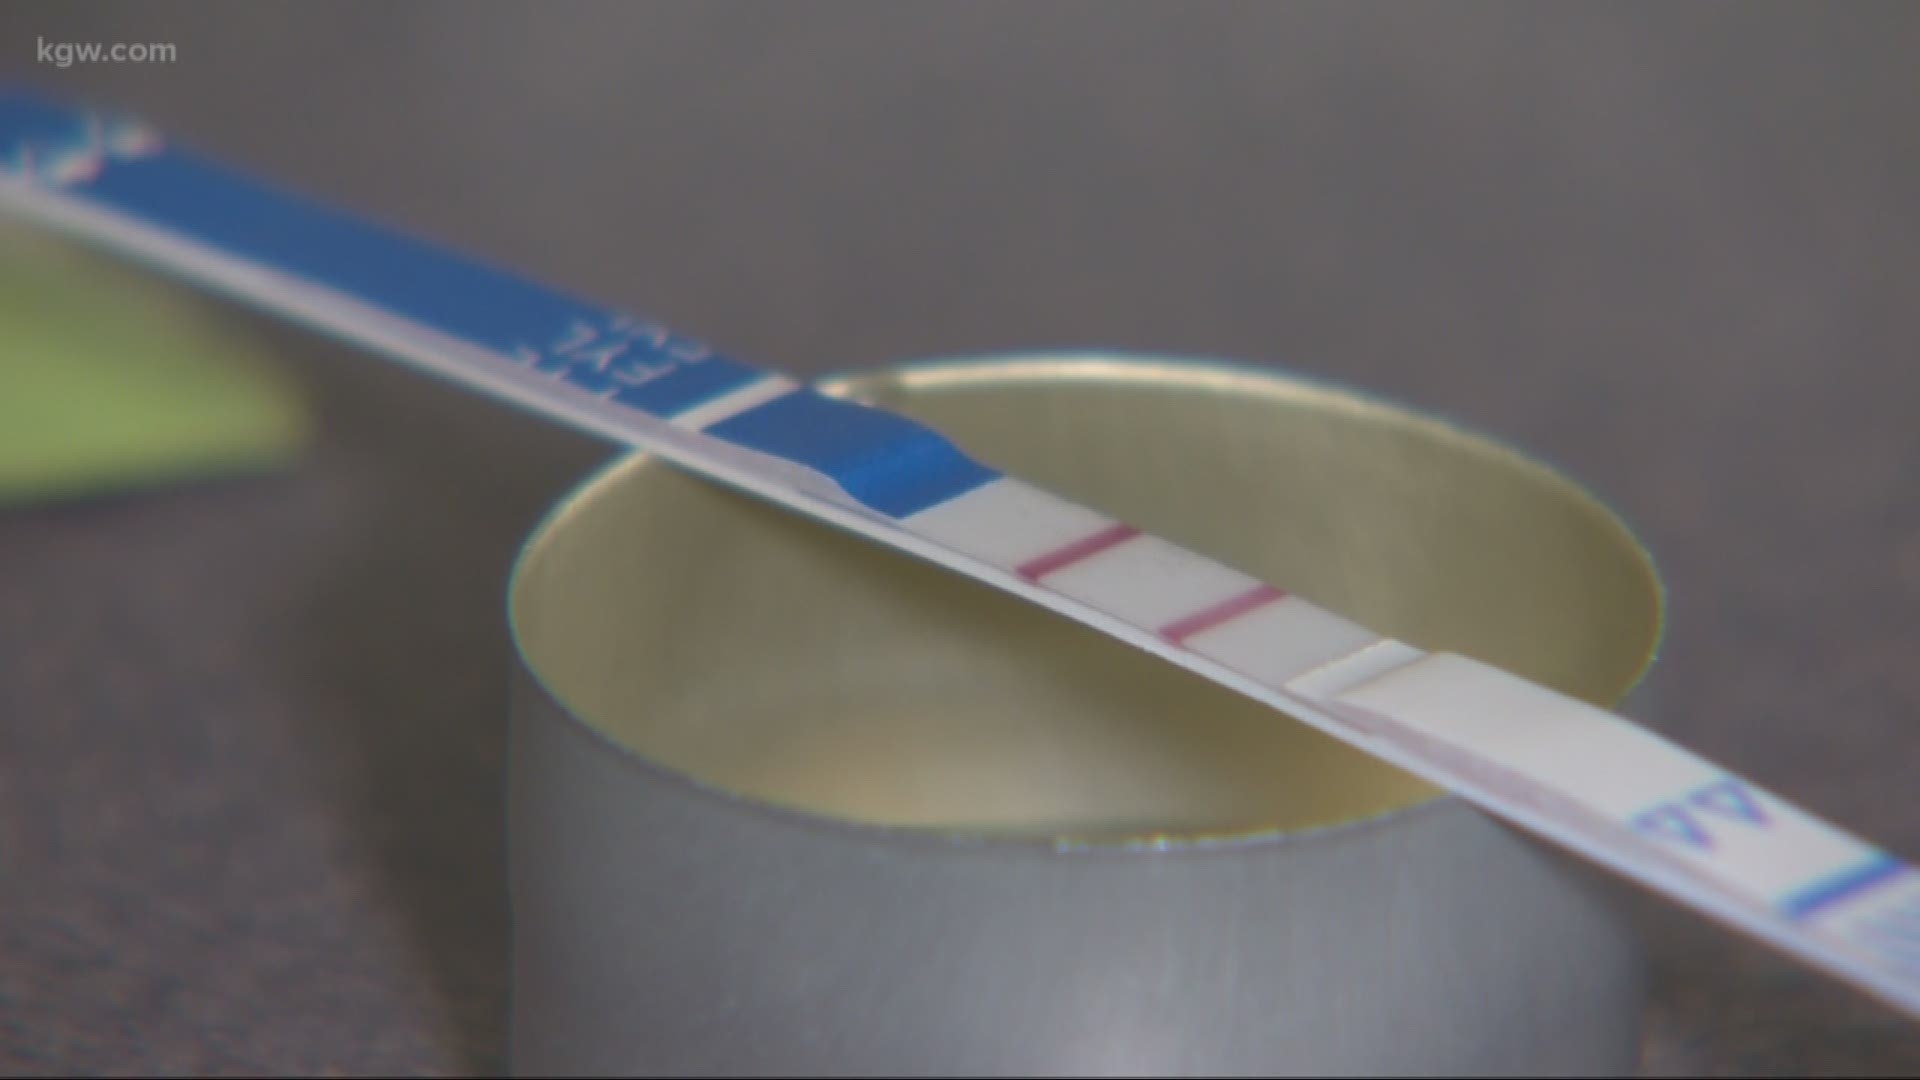 A Portland organization is working to help people impacted by the drug addiction crisis. The group is disseminating info and testing heroin to see if it has fentanyl